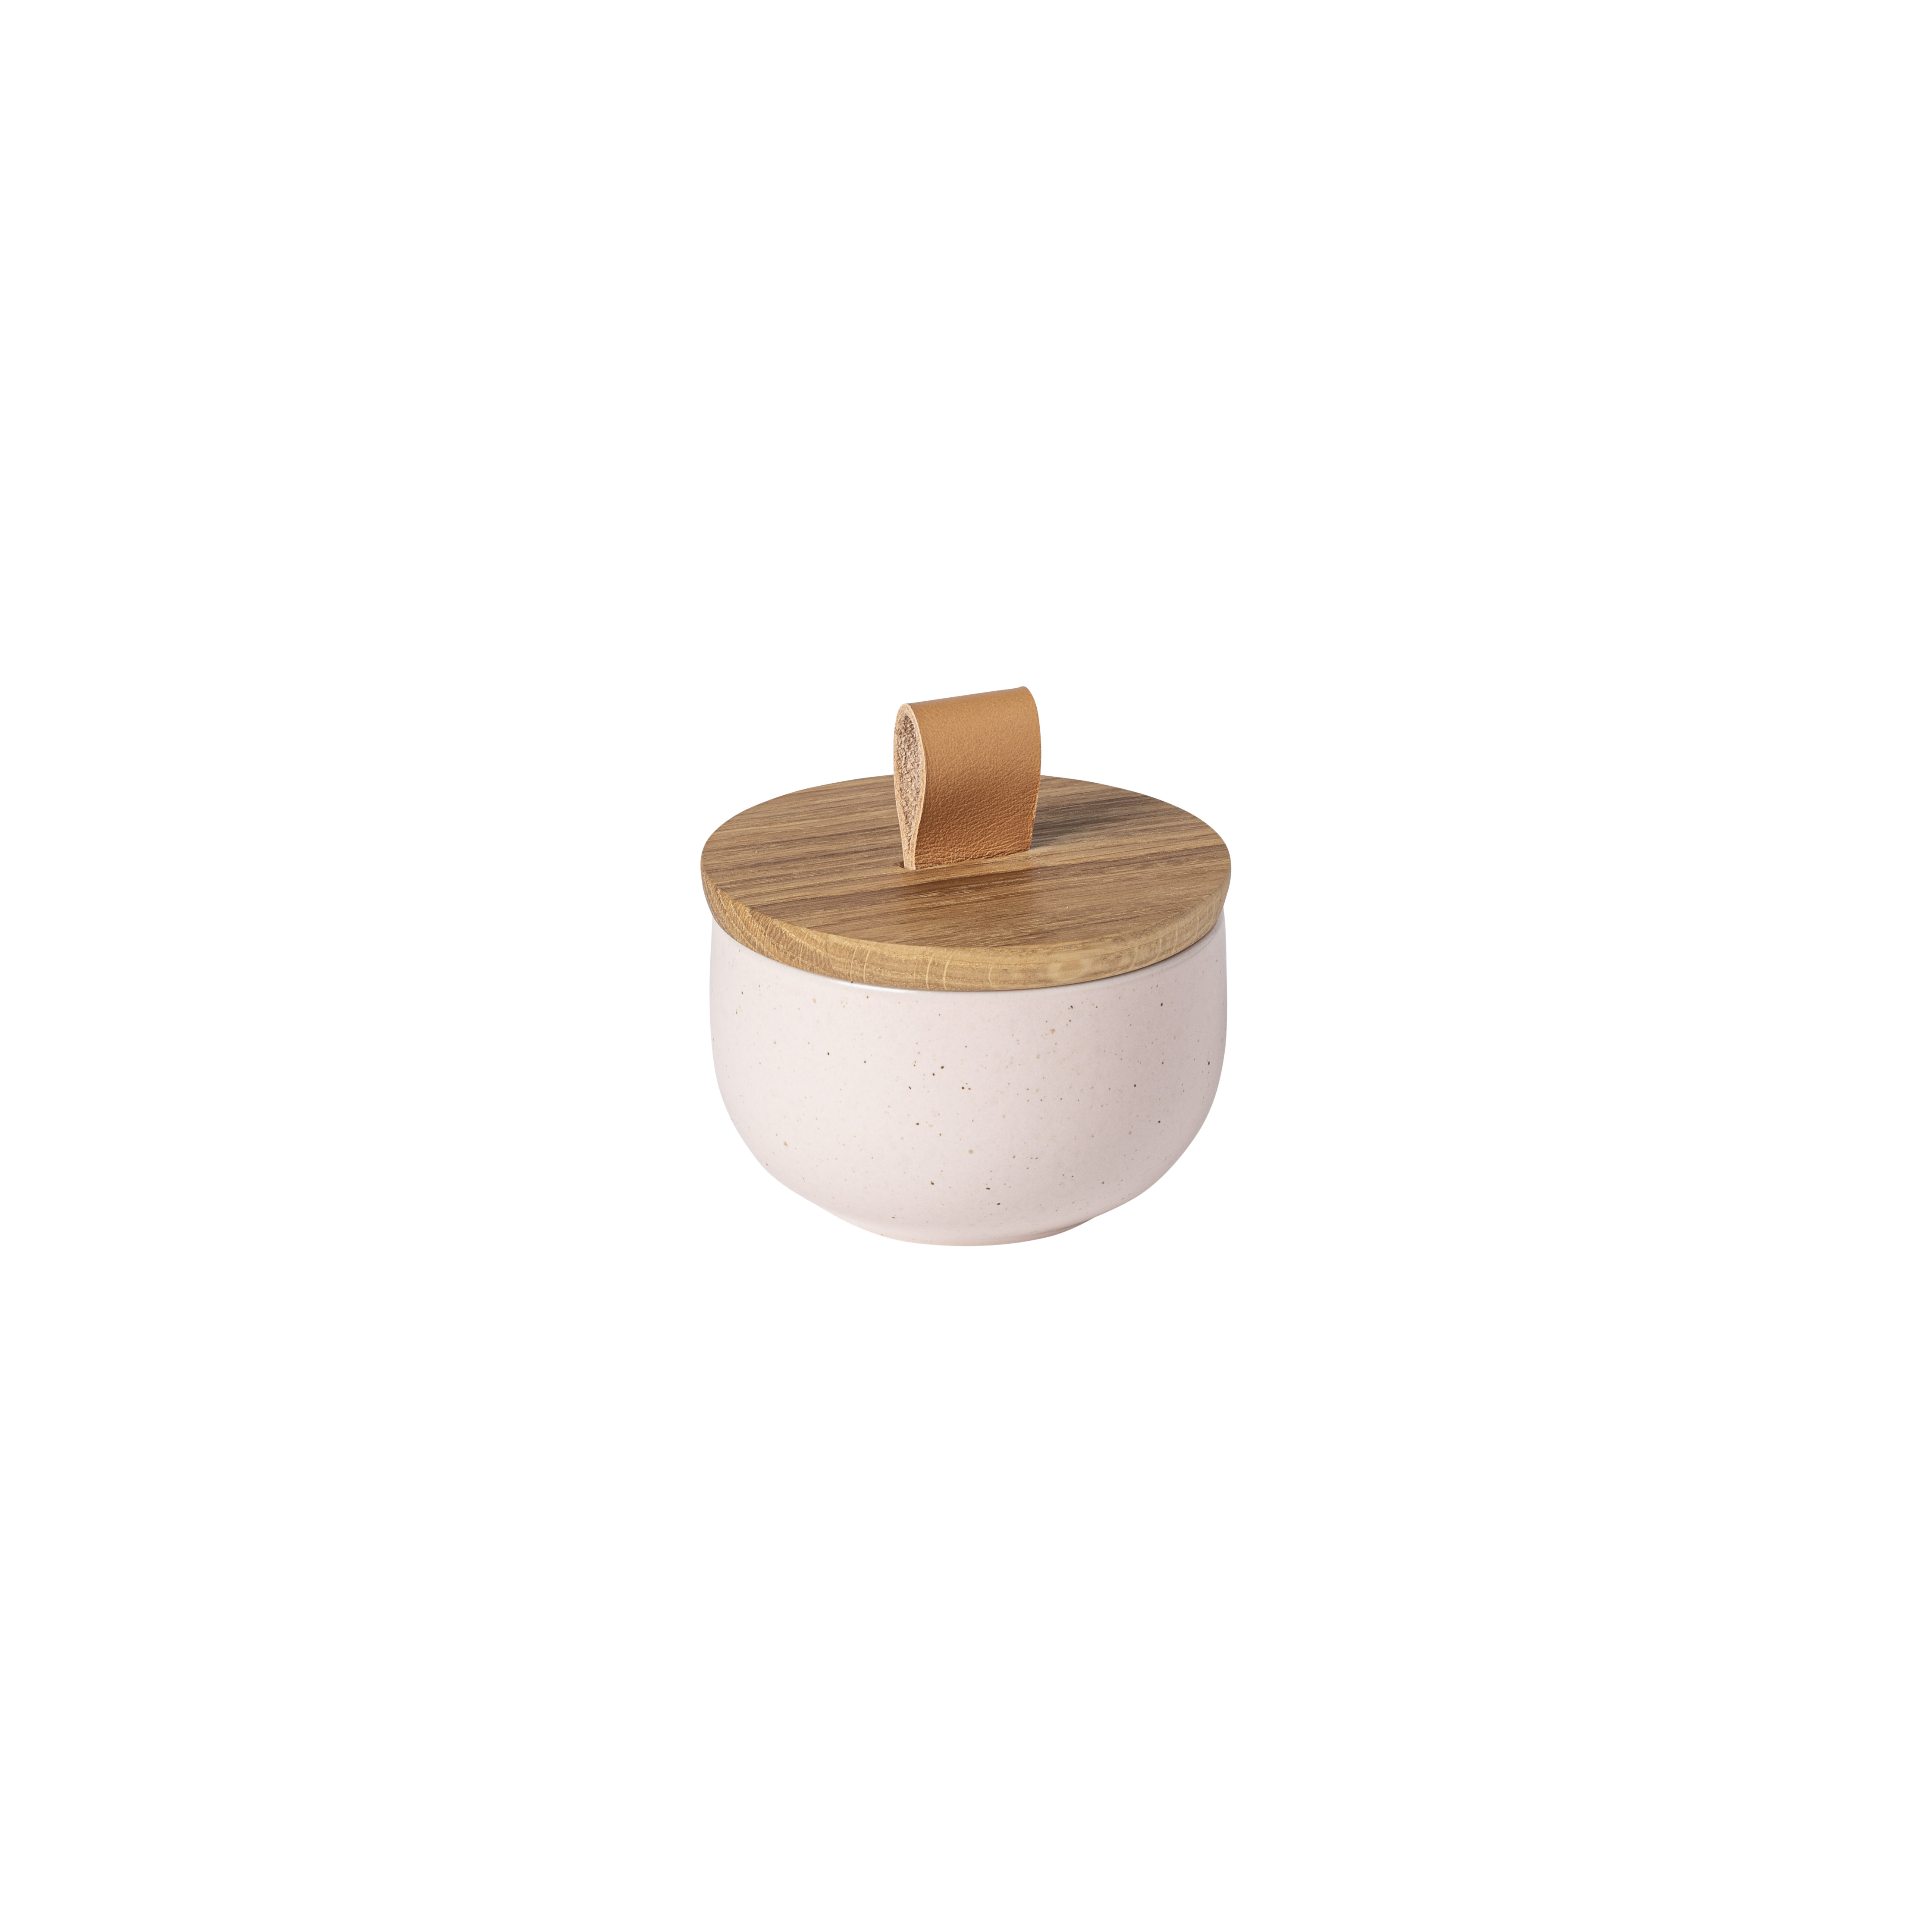 Pacifica Marshmallow Salt Cellar 9cm With Oak Lid Gift